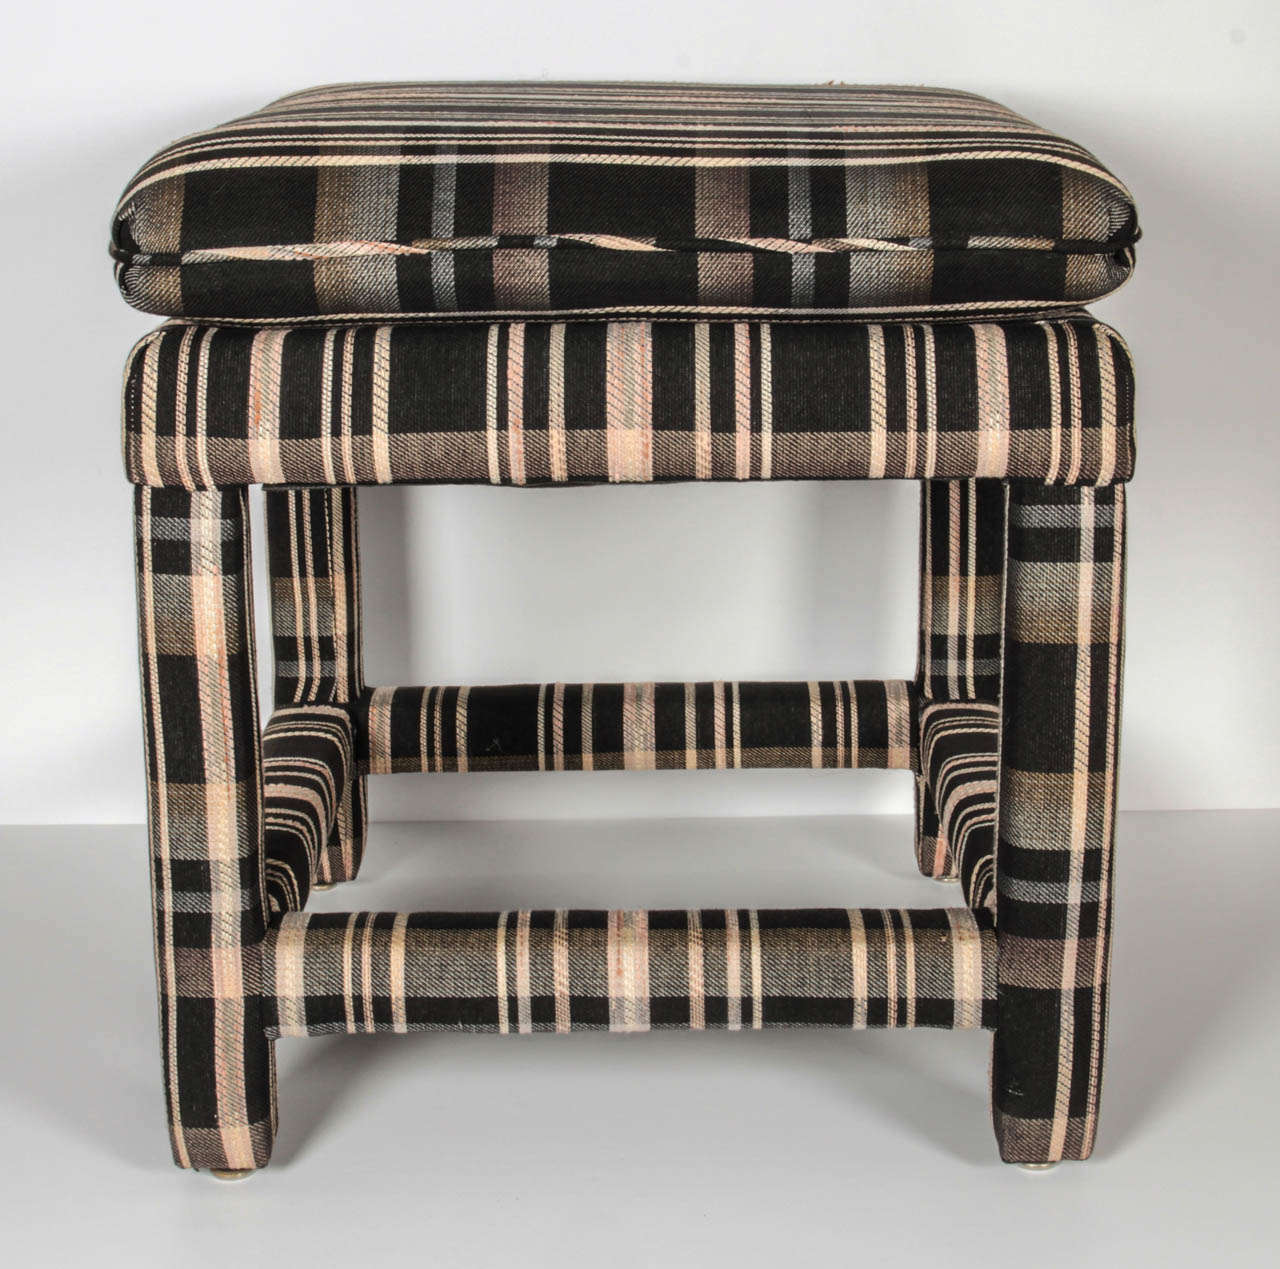 An upholstered stool with original fabric.